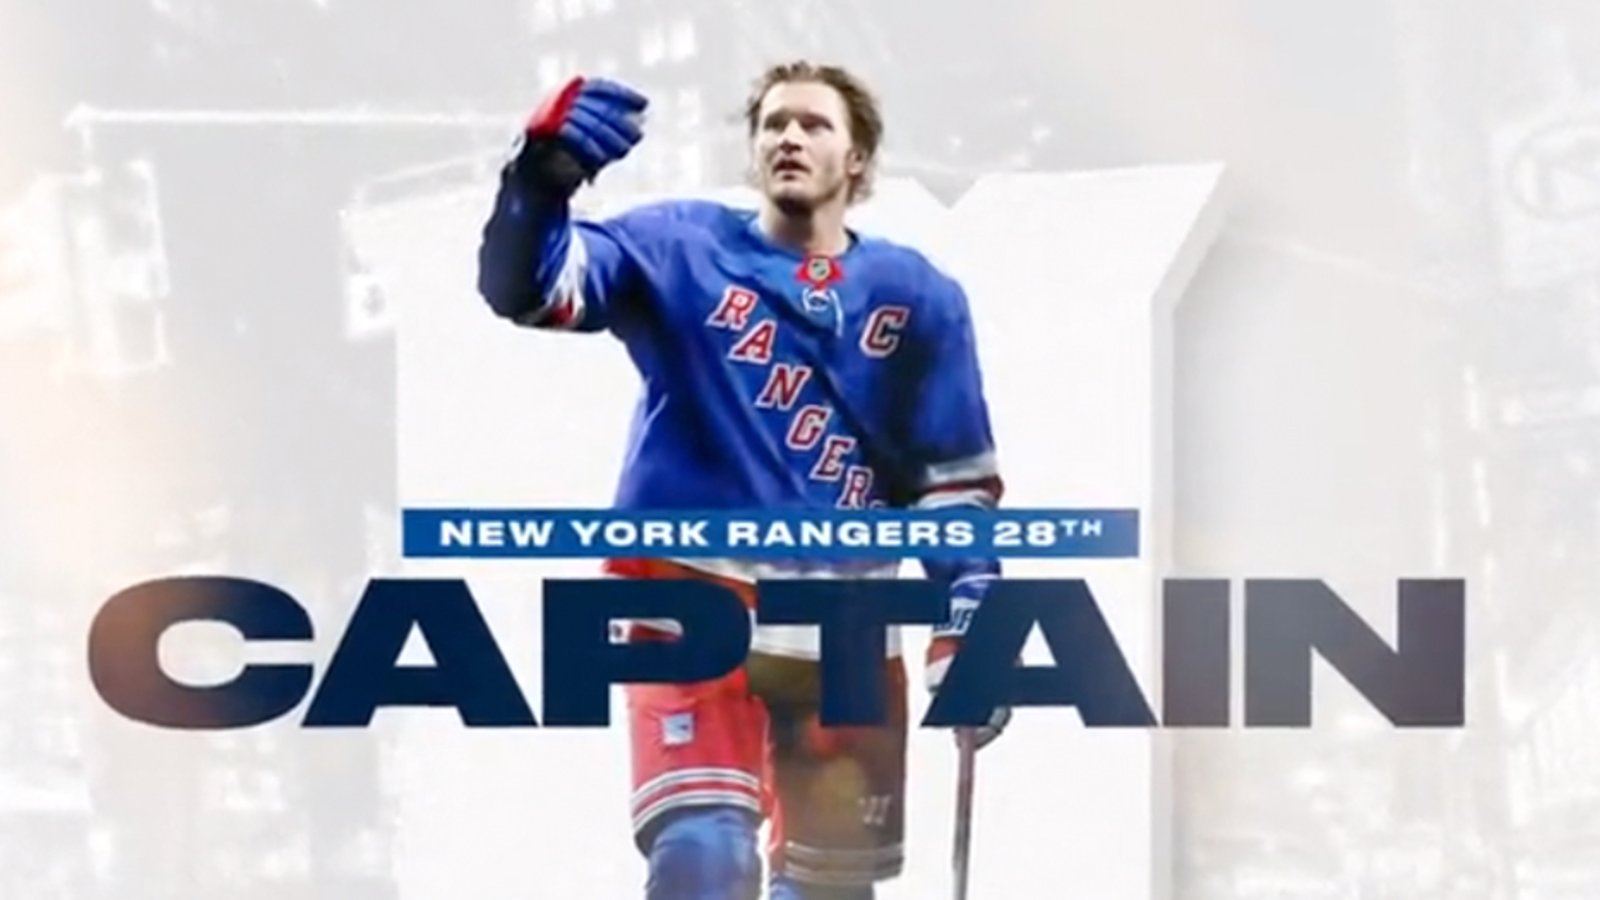 Rangers officially name Jacob Trouba as the 28th captain in franchise history